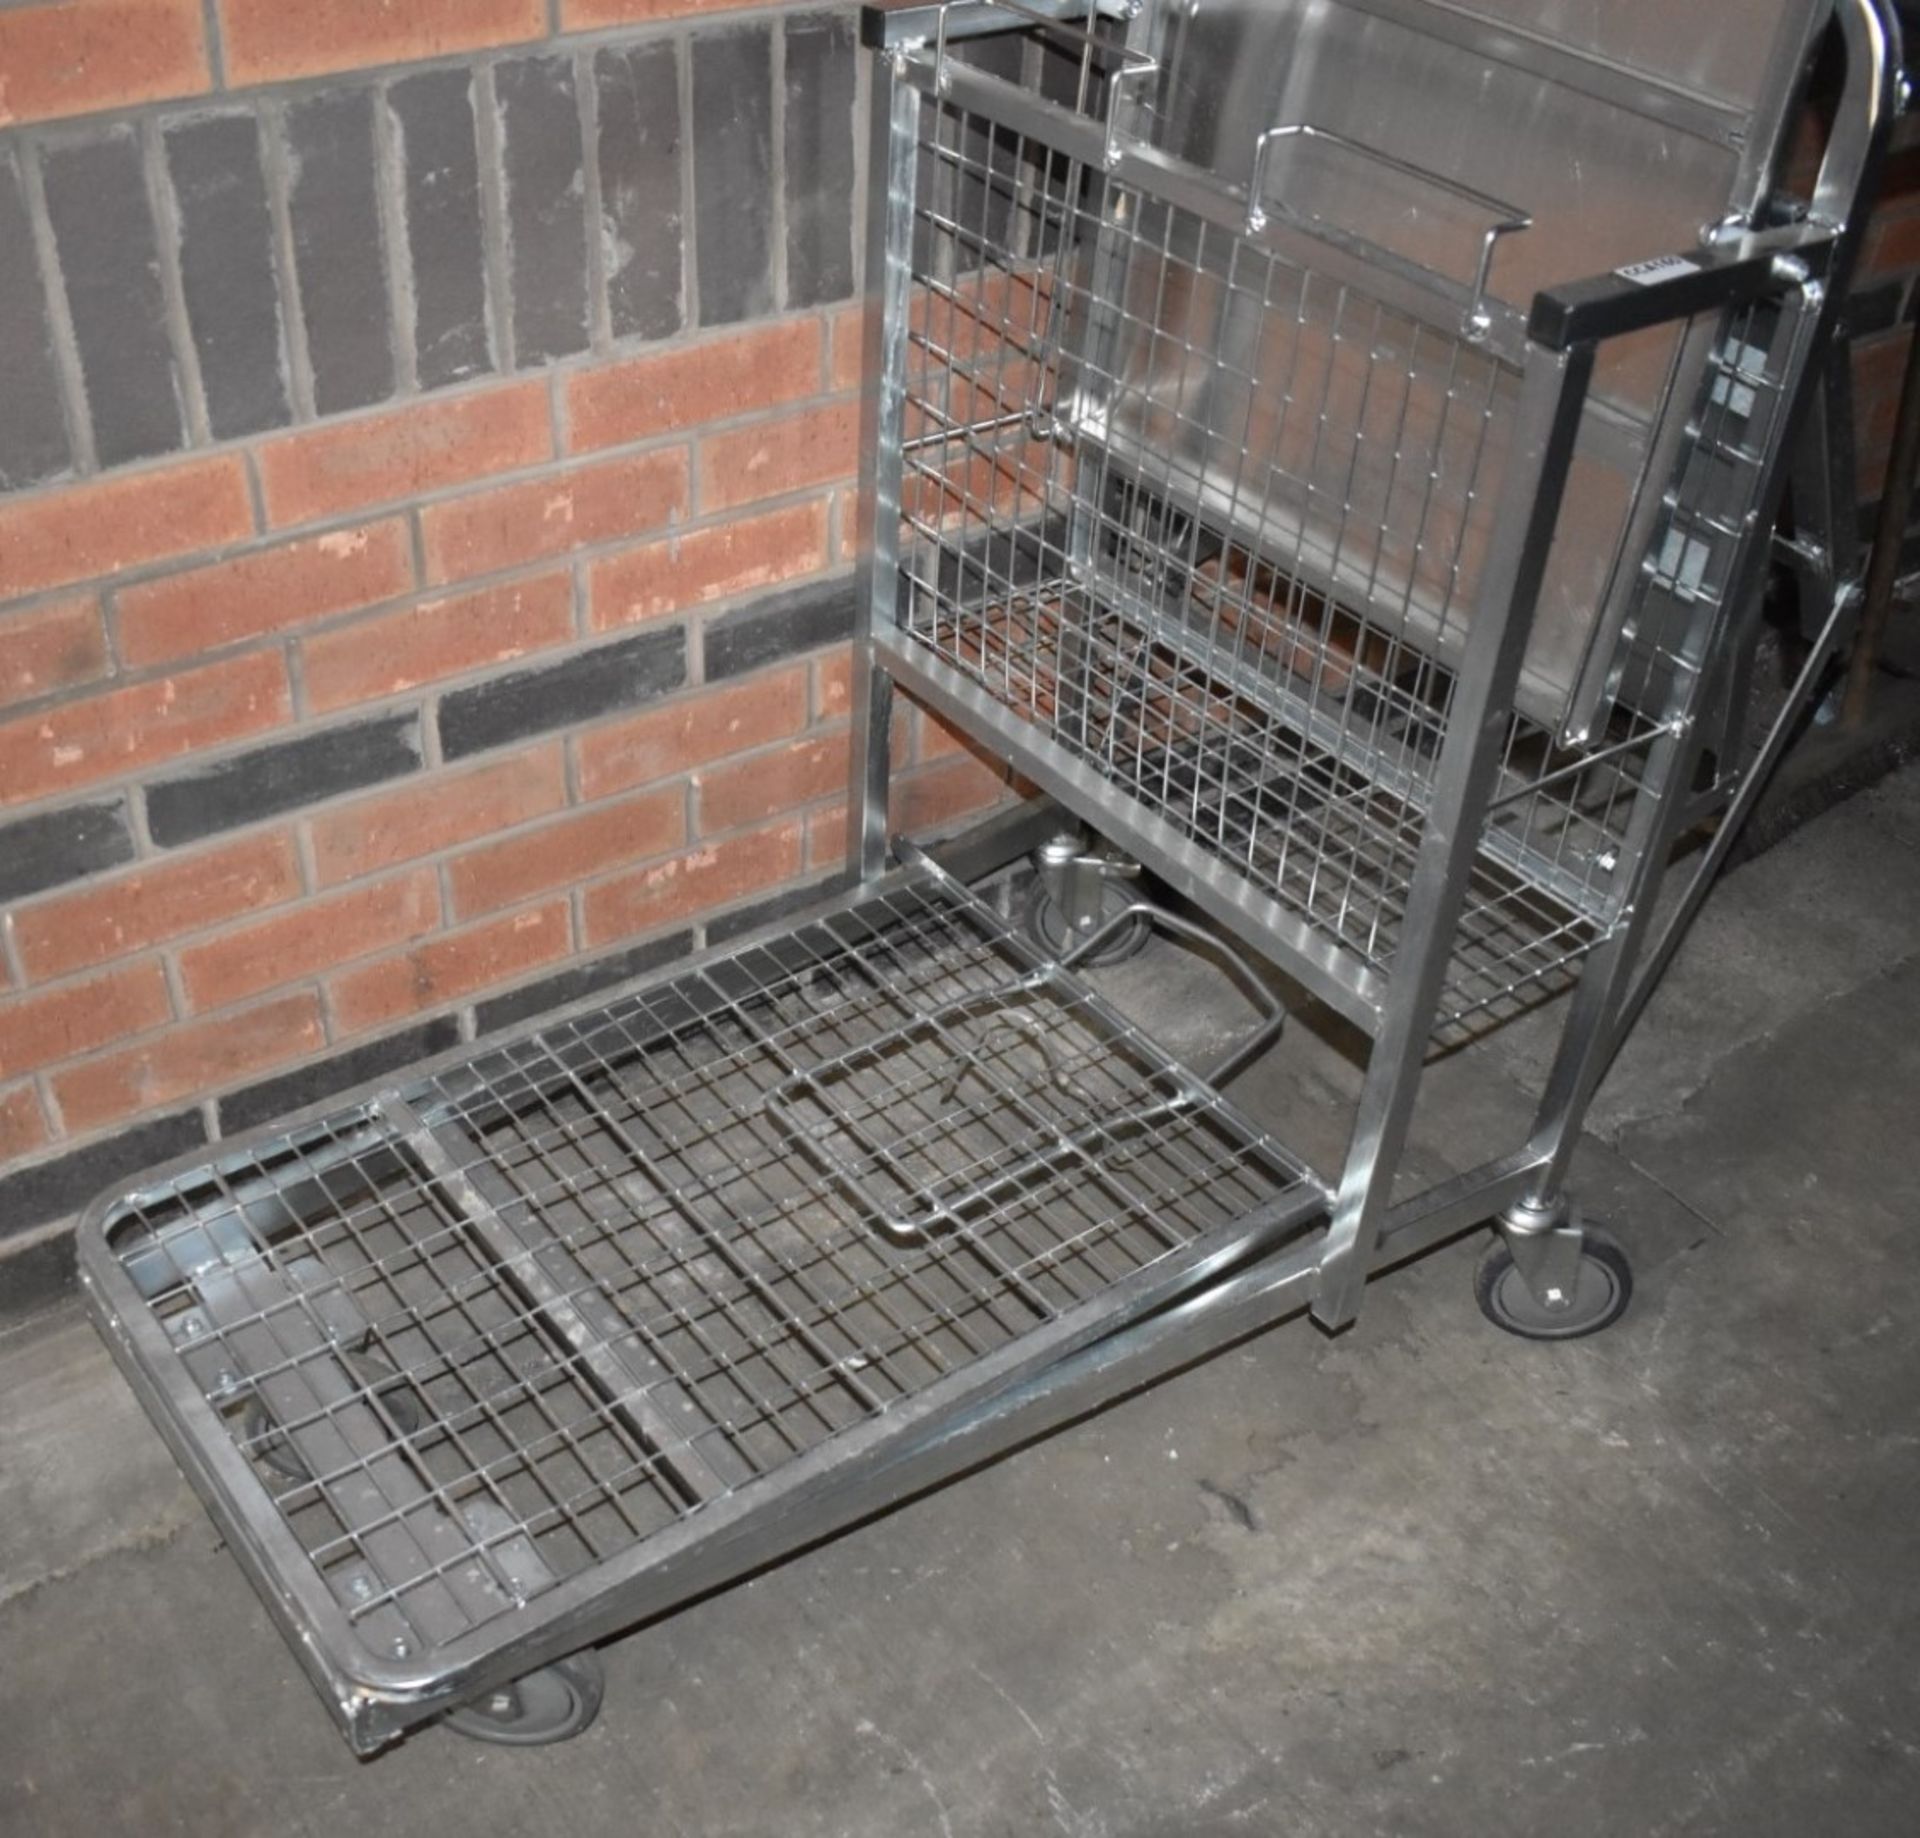 1 x Supermarket Retail Merchandising Trolley With Pull Out Step and Folding Shelf - CL595 - Ref: CCA - Image 9 of 9